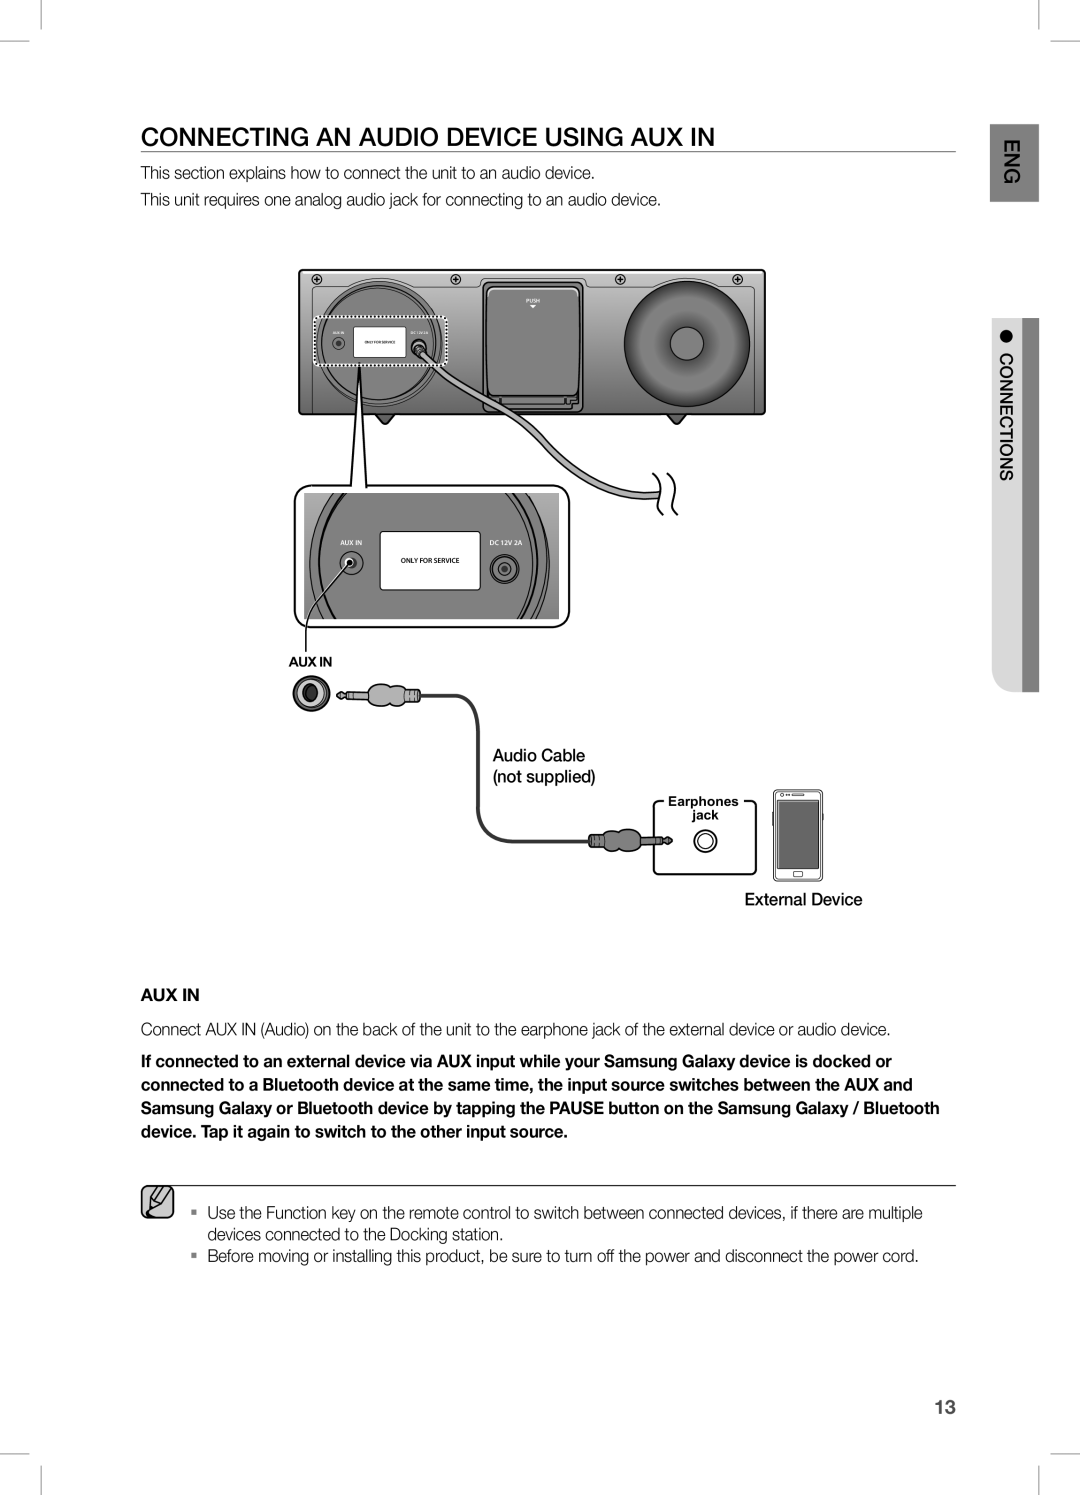 Samsung DA-E570 user manual connecting an aUdio deVice Using aUX in 